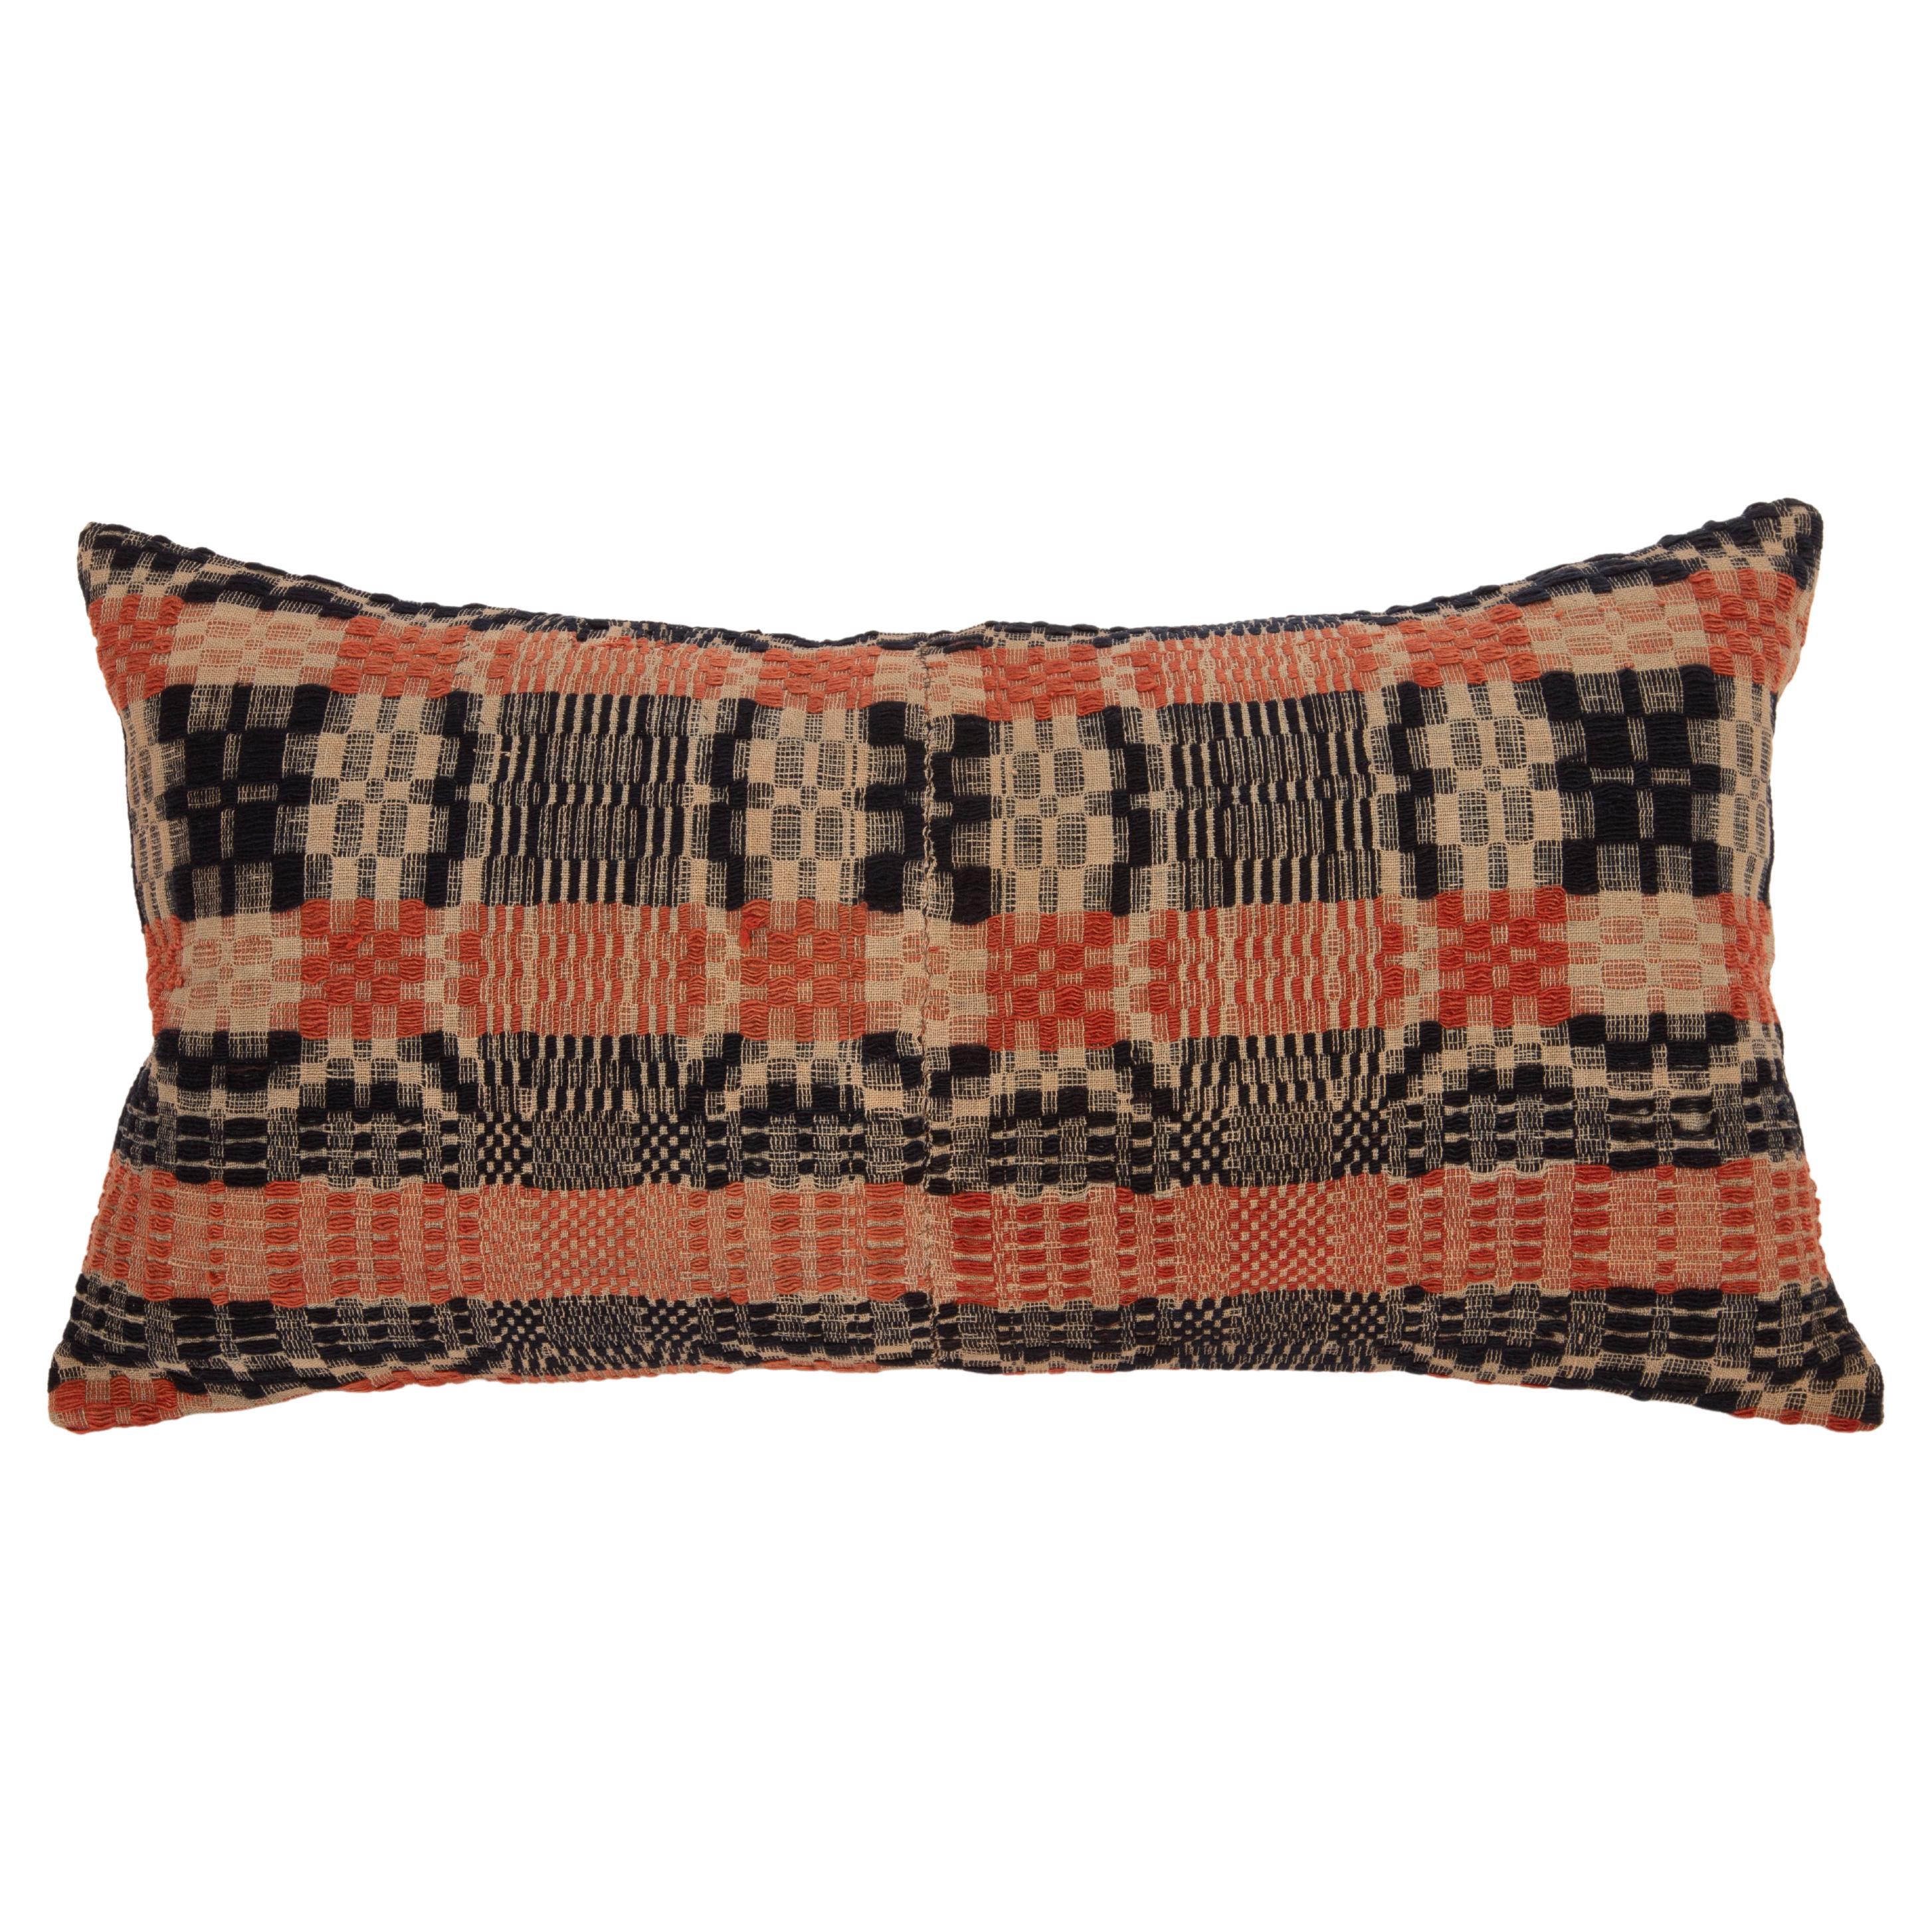 American Coverlet Pillow Cover, North America, 19th C.